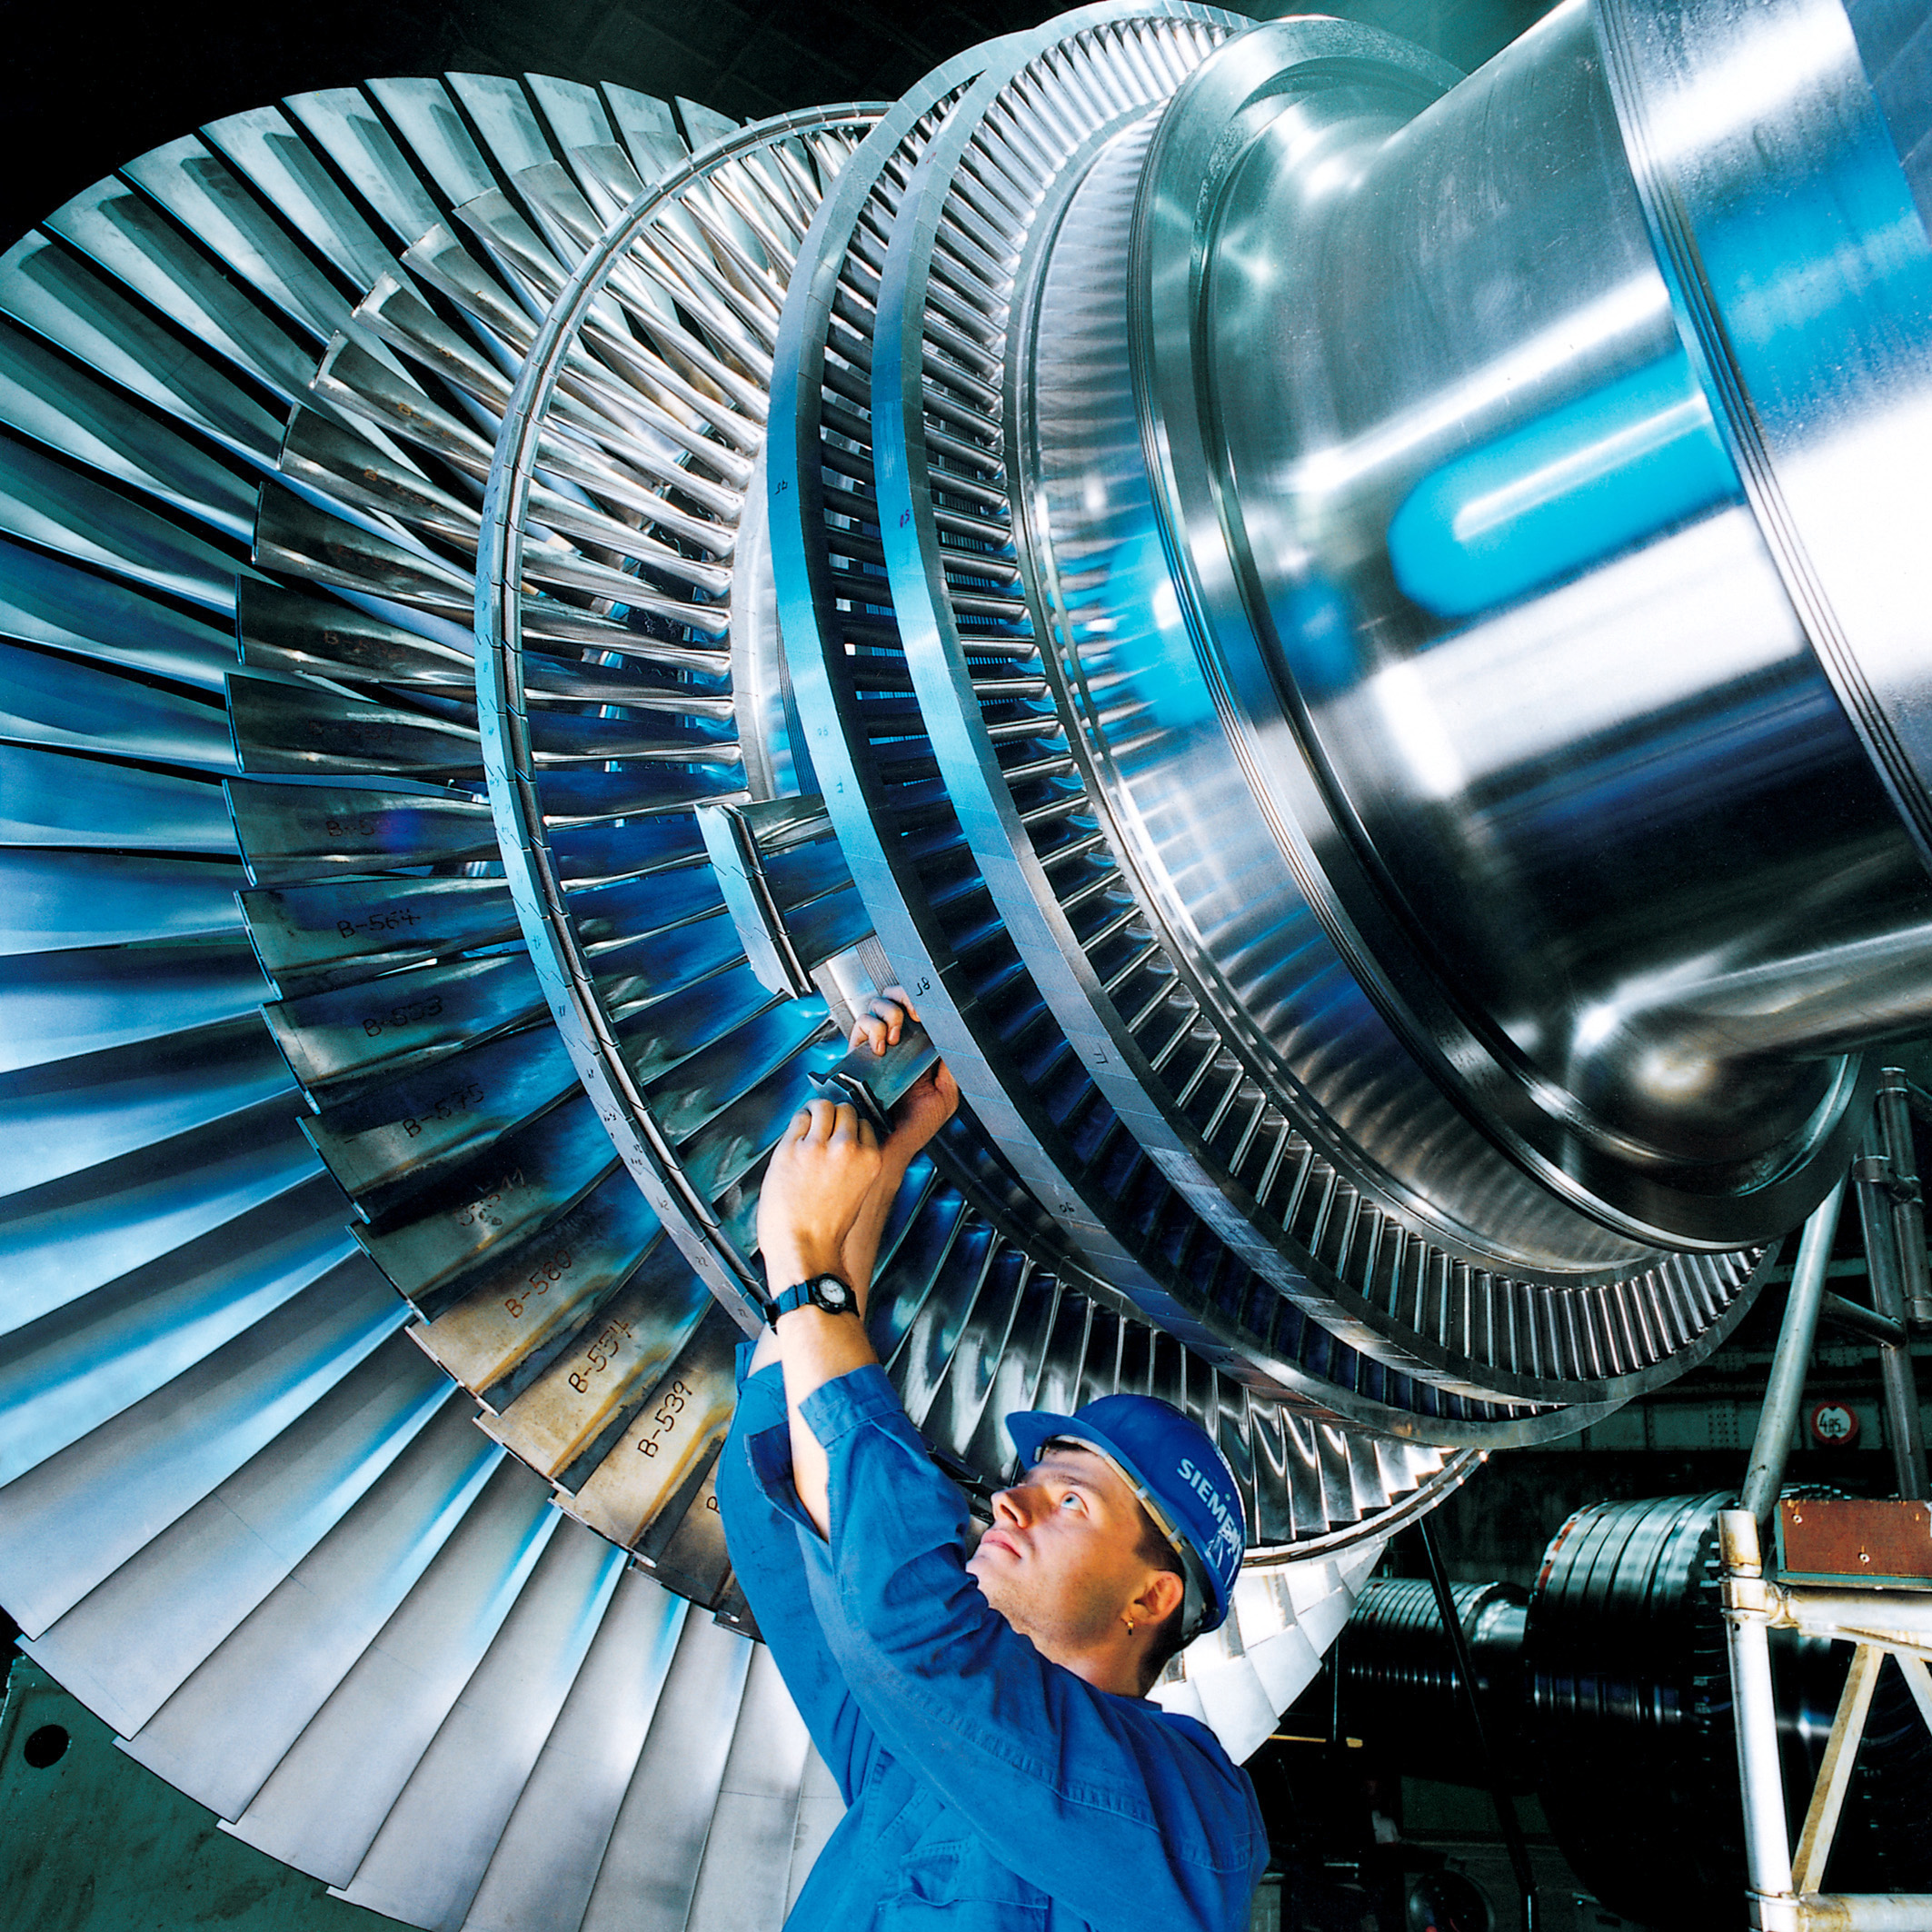 Global Gas Turbine Heavy Duty Services Market 2018 Expected Growth, Segment, Demand and Study of Key Players- Research Predictions to 2023